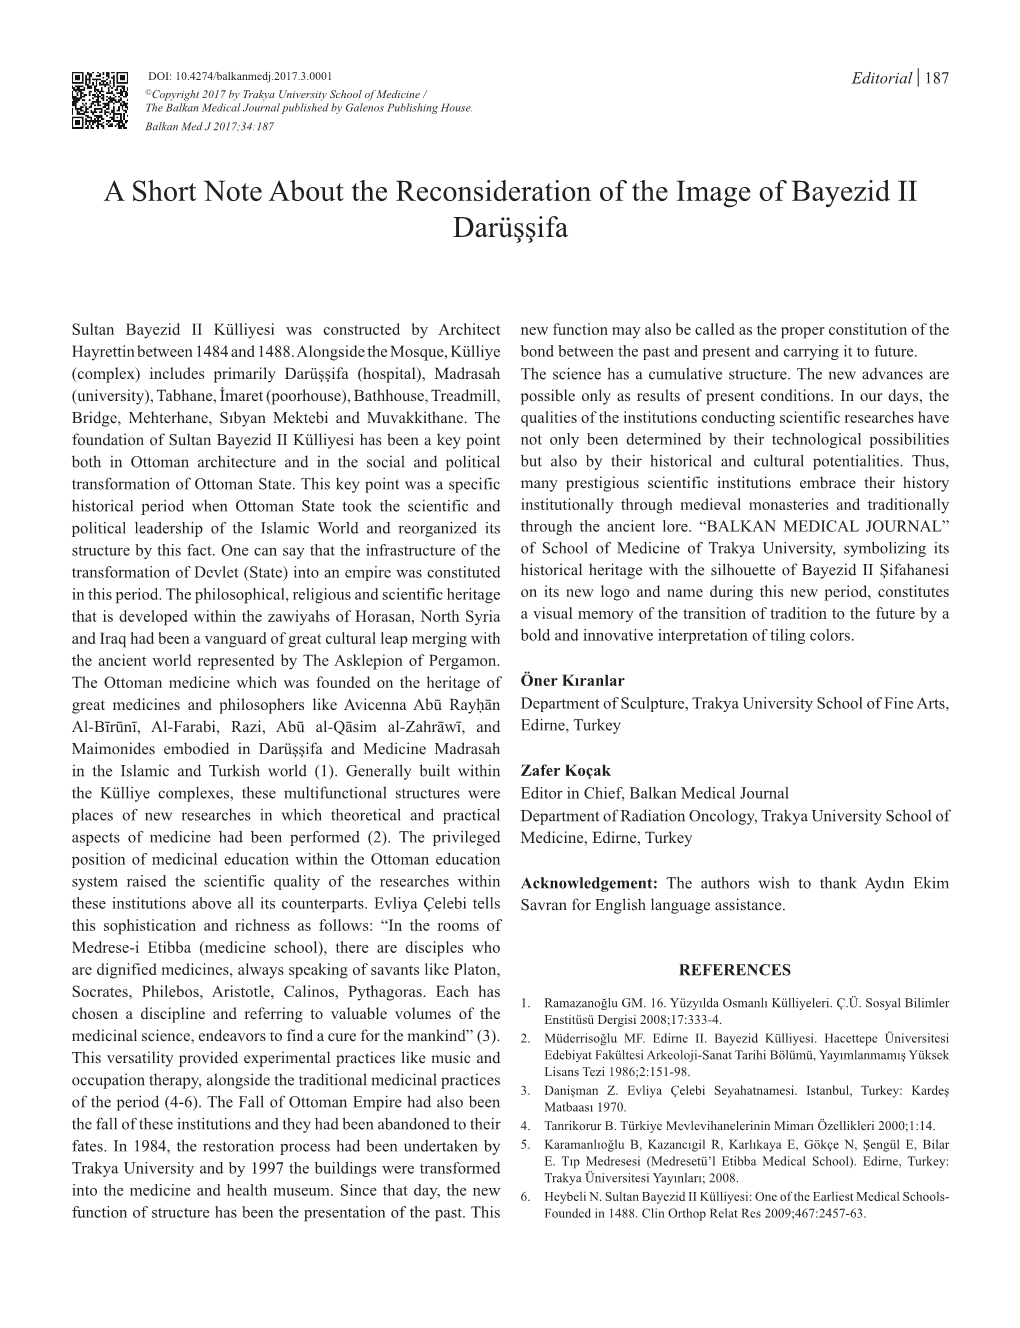 A Short Note About the Reconsideration of the Image of Bayezid II Darüşşifa